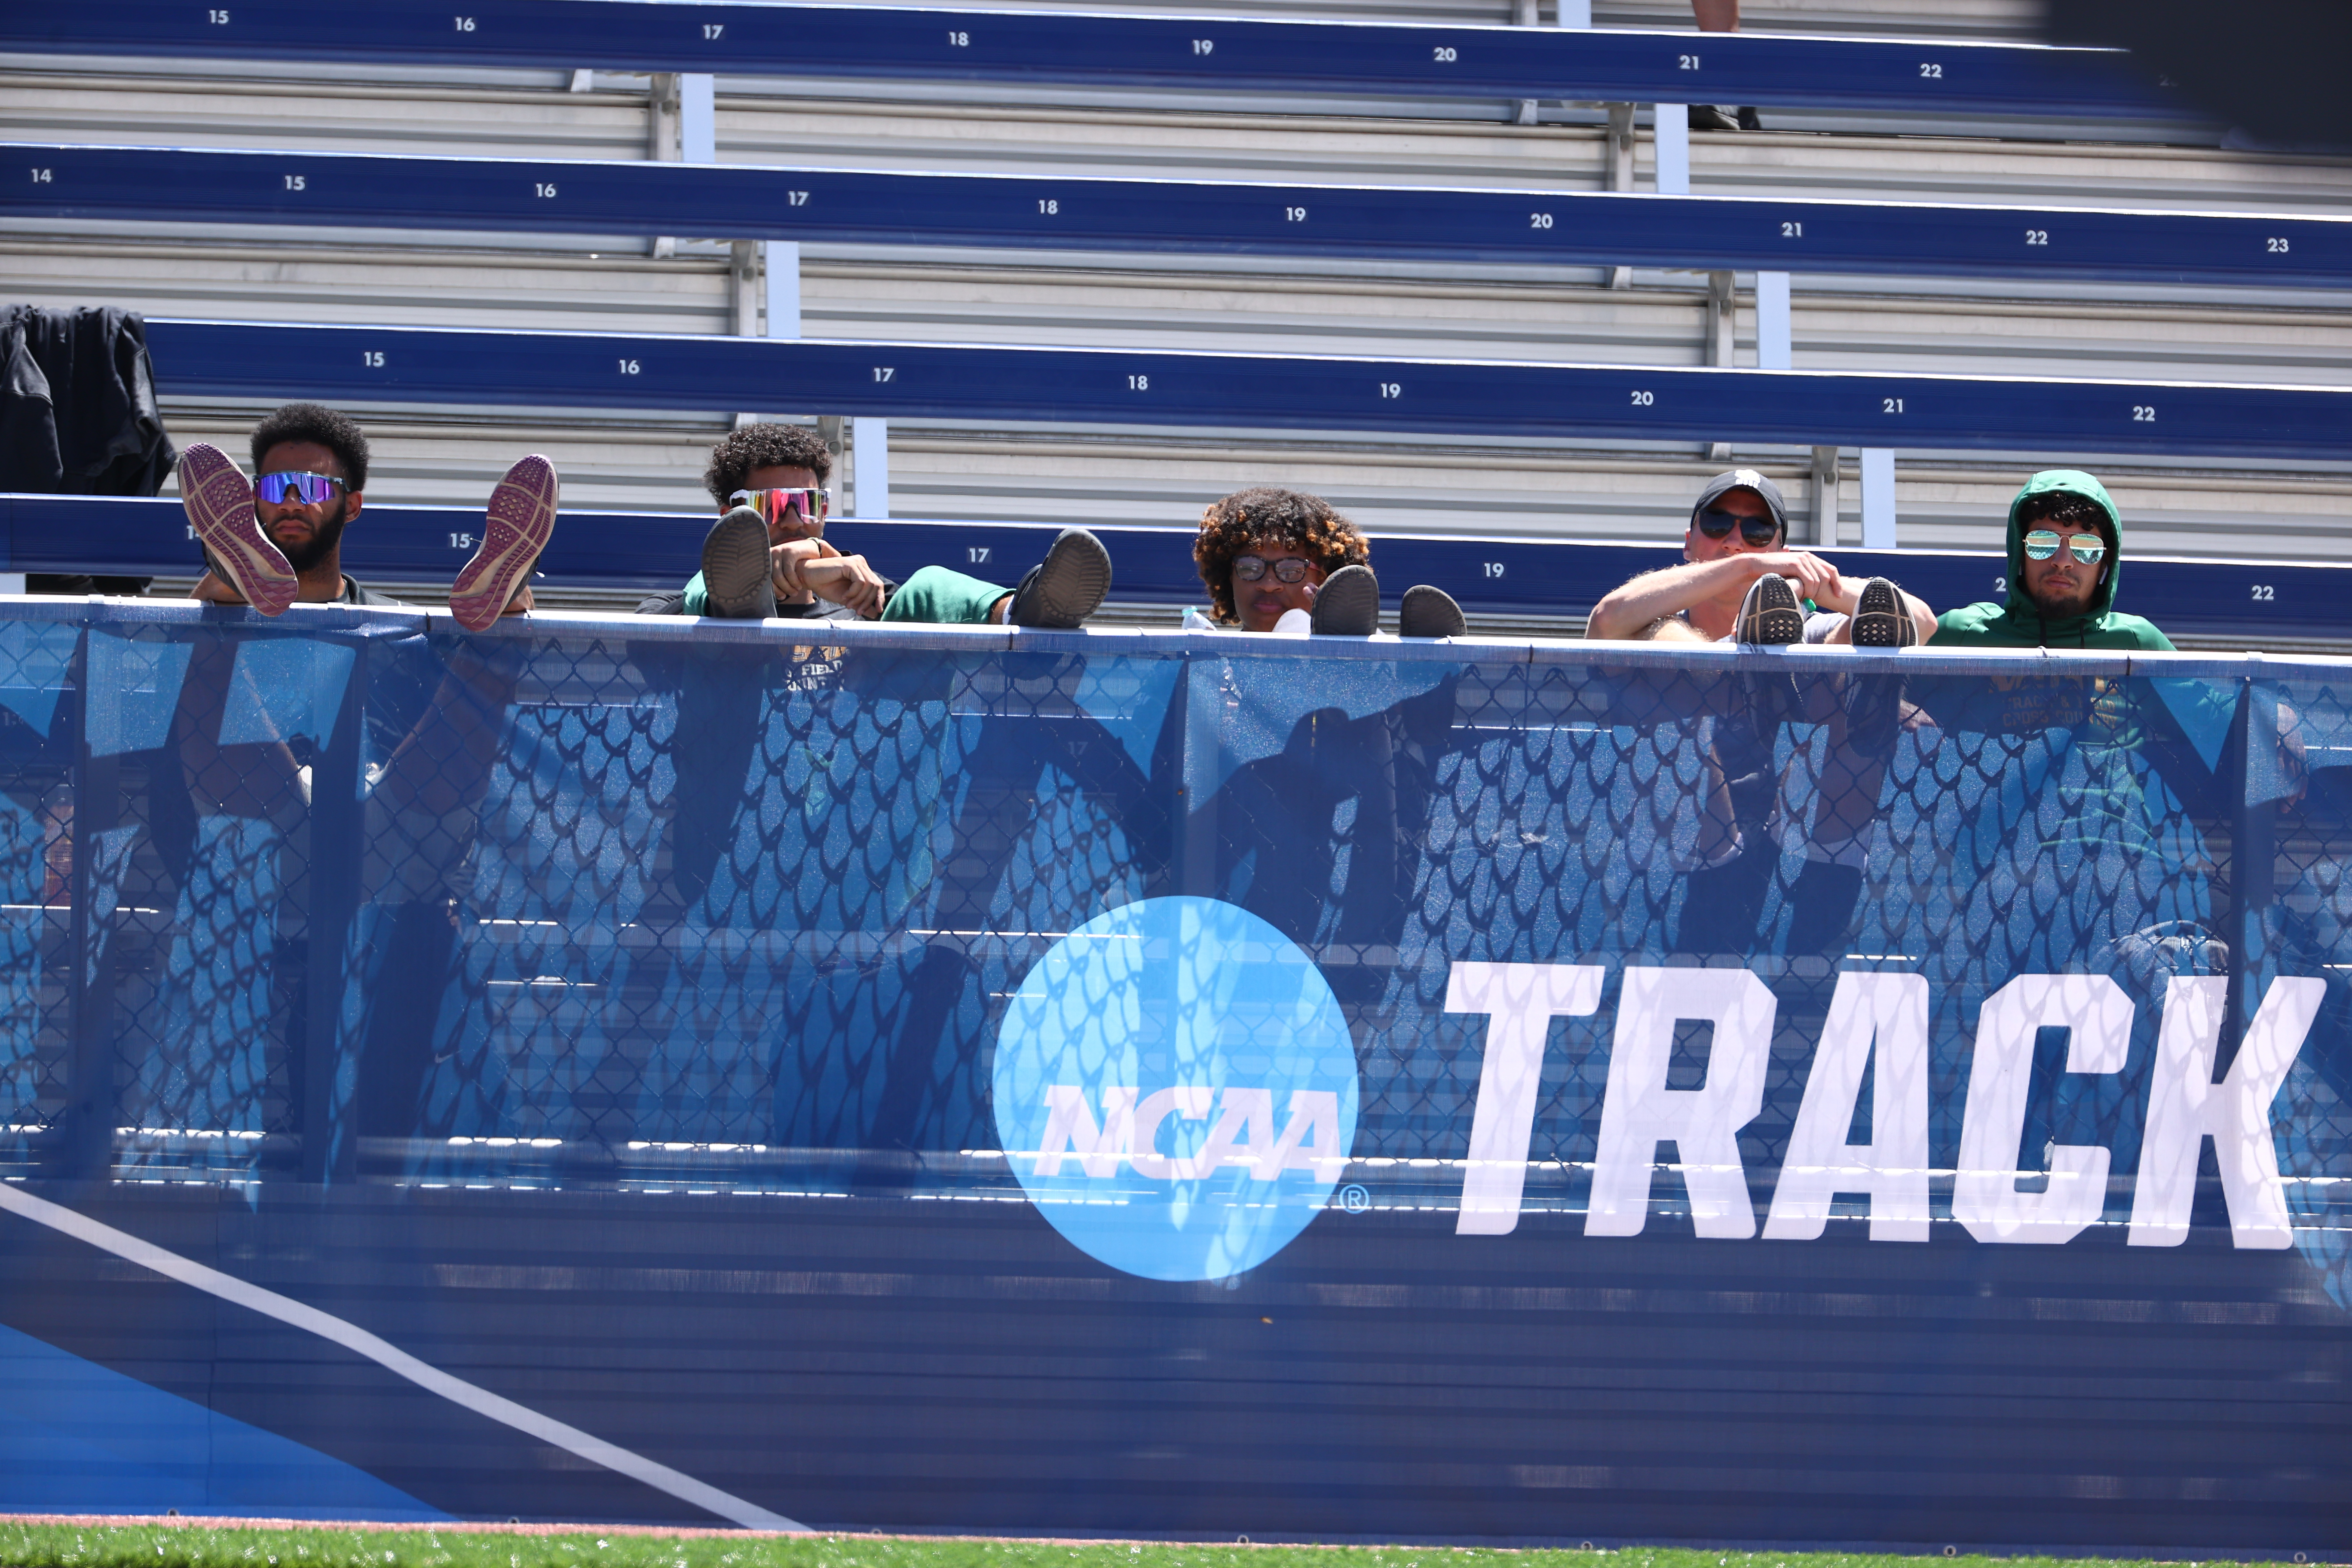 NCAA outdoor track and field championships Free live stream, TV schedule